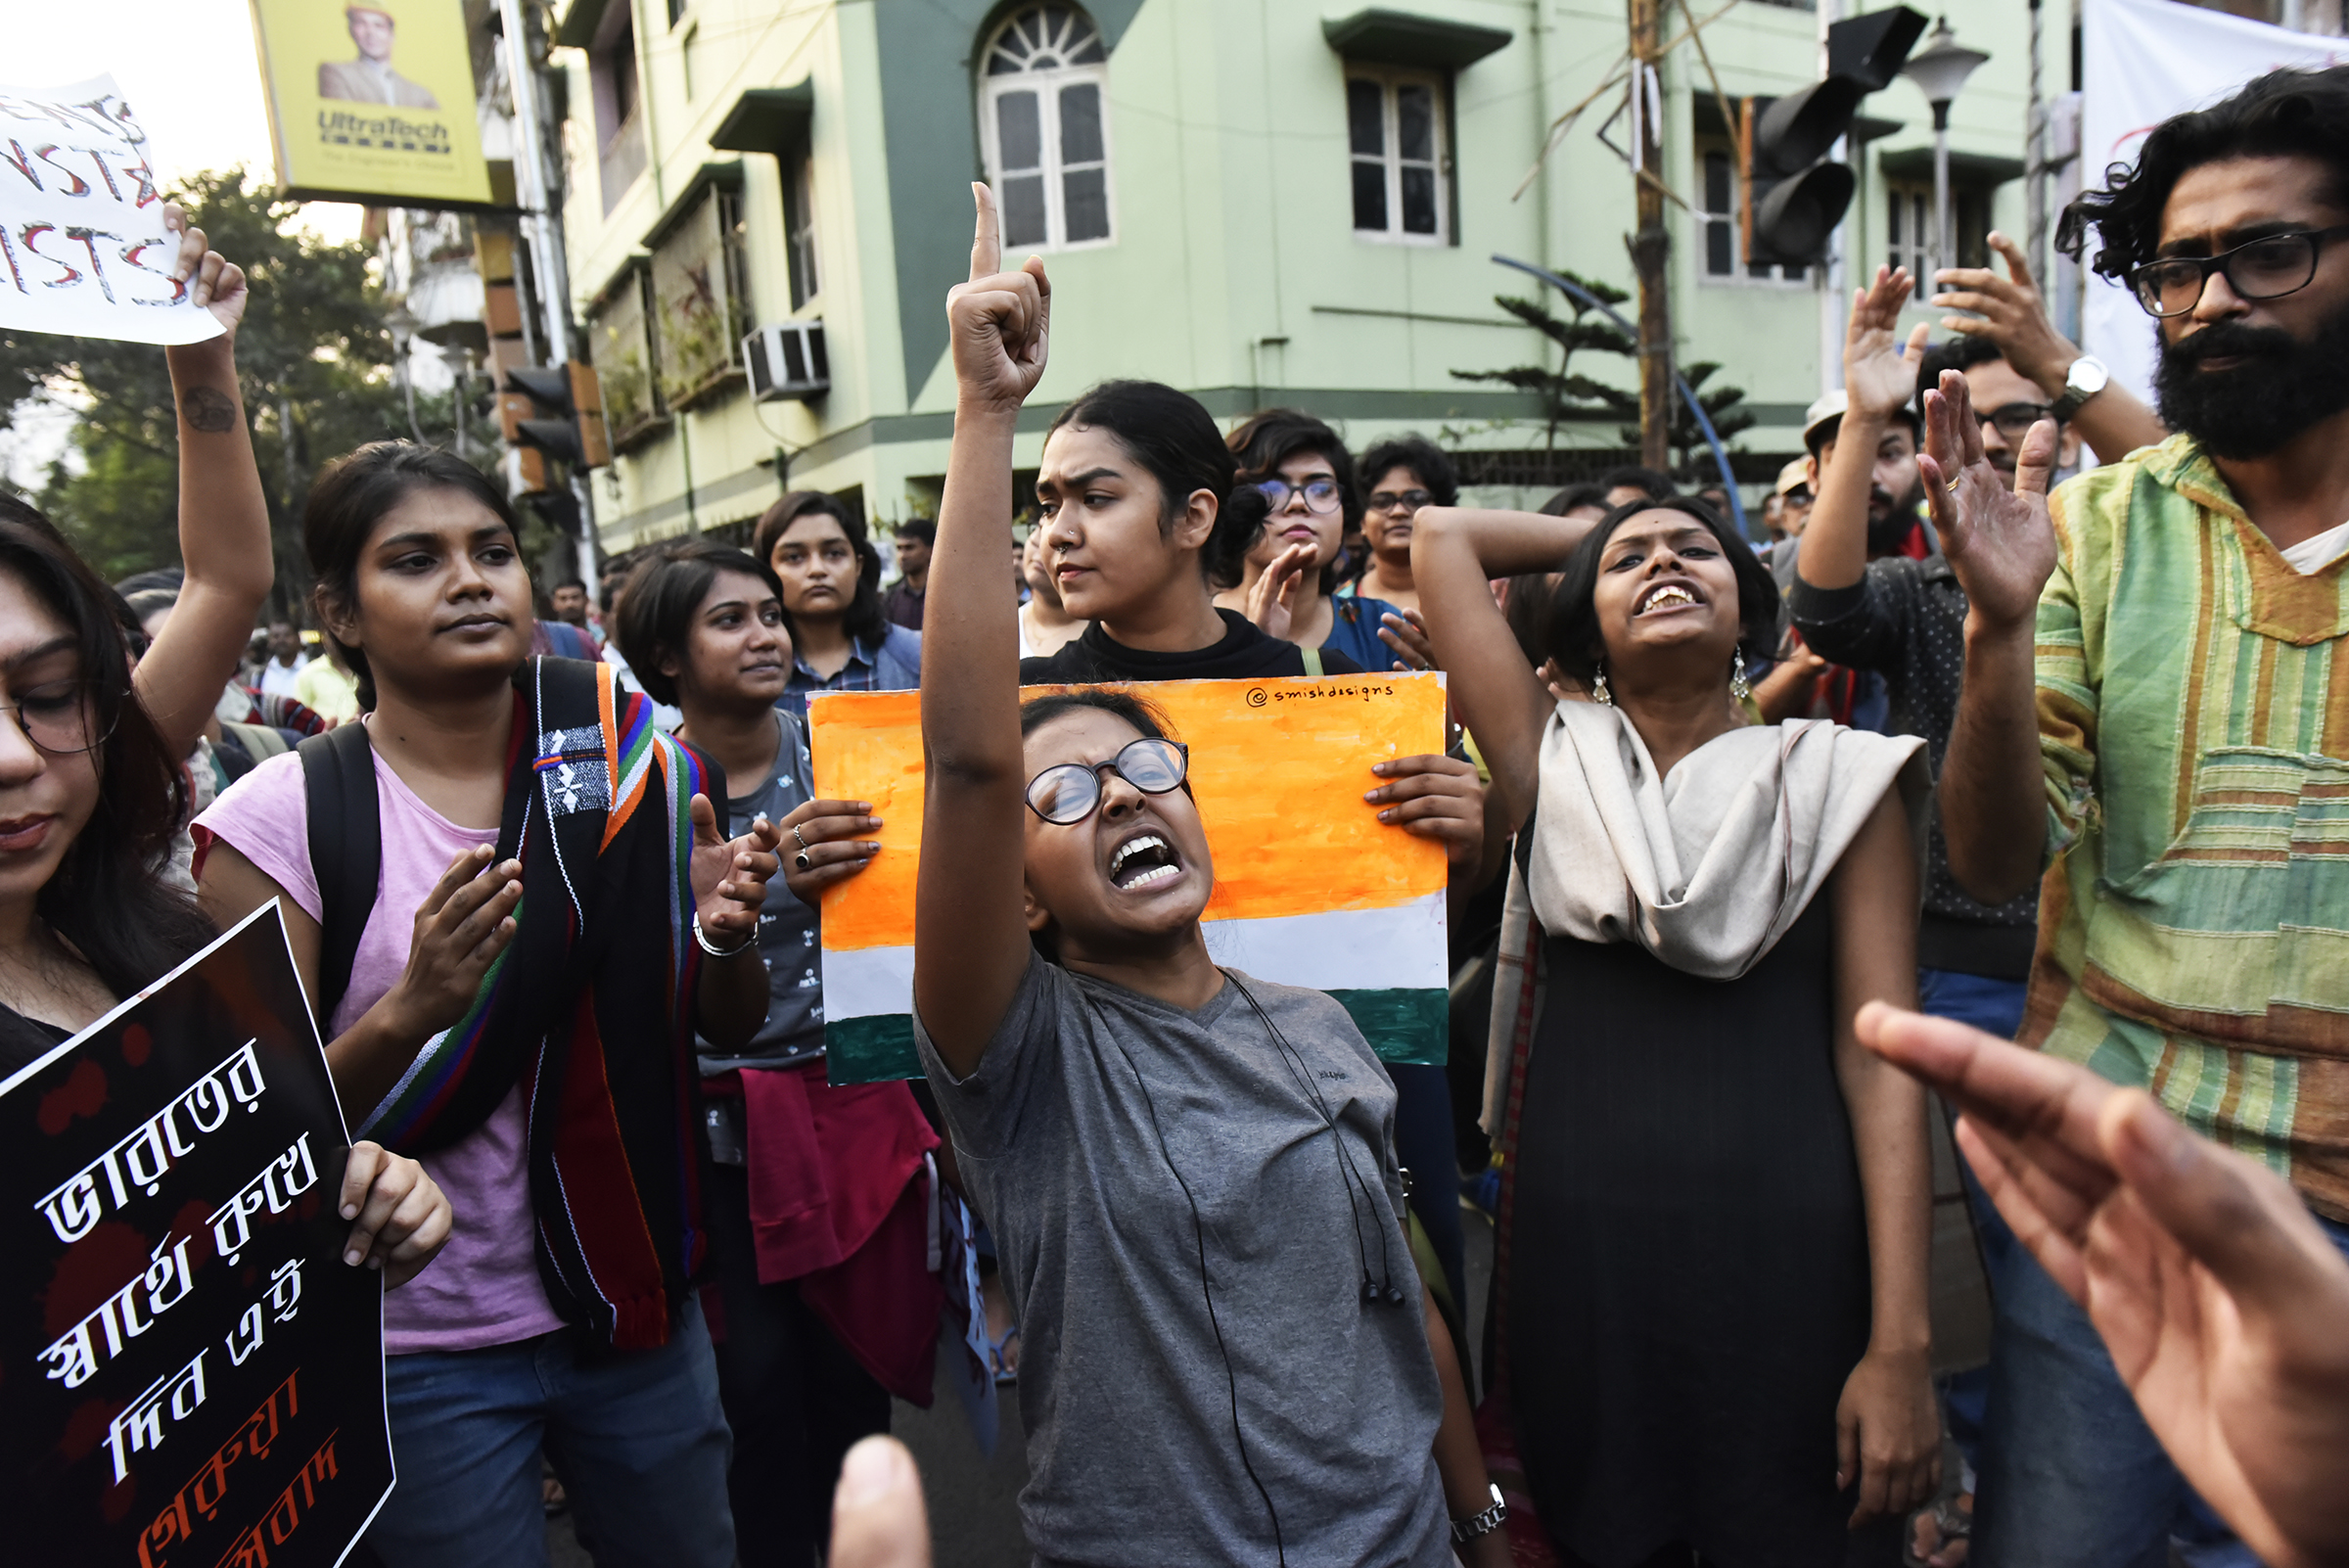 Jadavpur University students in Kolkata demonstrate against police brutality towards the students of Jamia Millia Islamia University in New Delhi, who were protesting against the approval of the Citizenship Amendment Bill (CAB) on Dec. 16, 2019. (Indranil Aditya—NurPhoto via Getty Images)